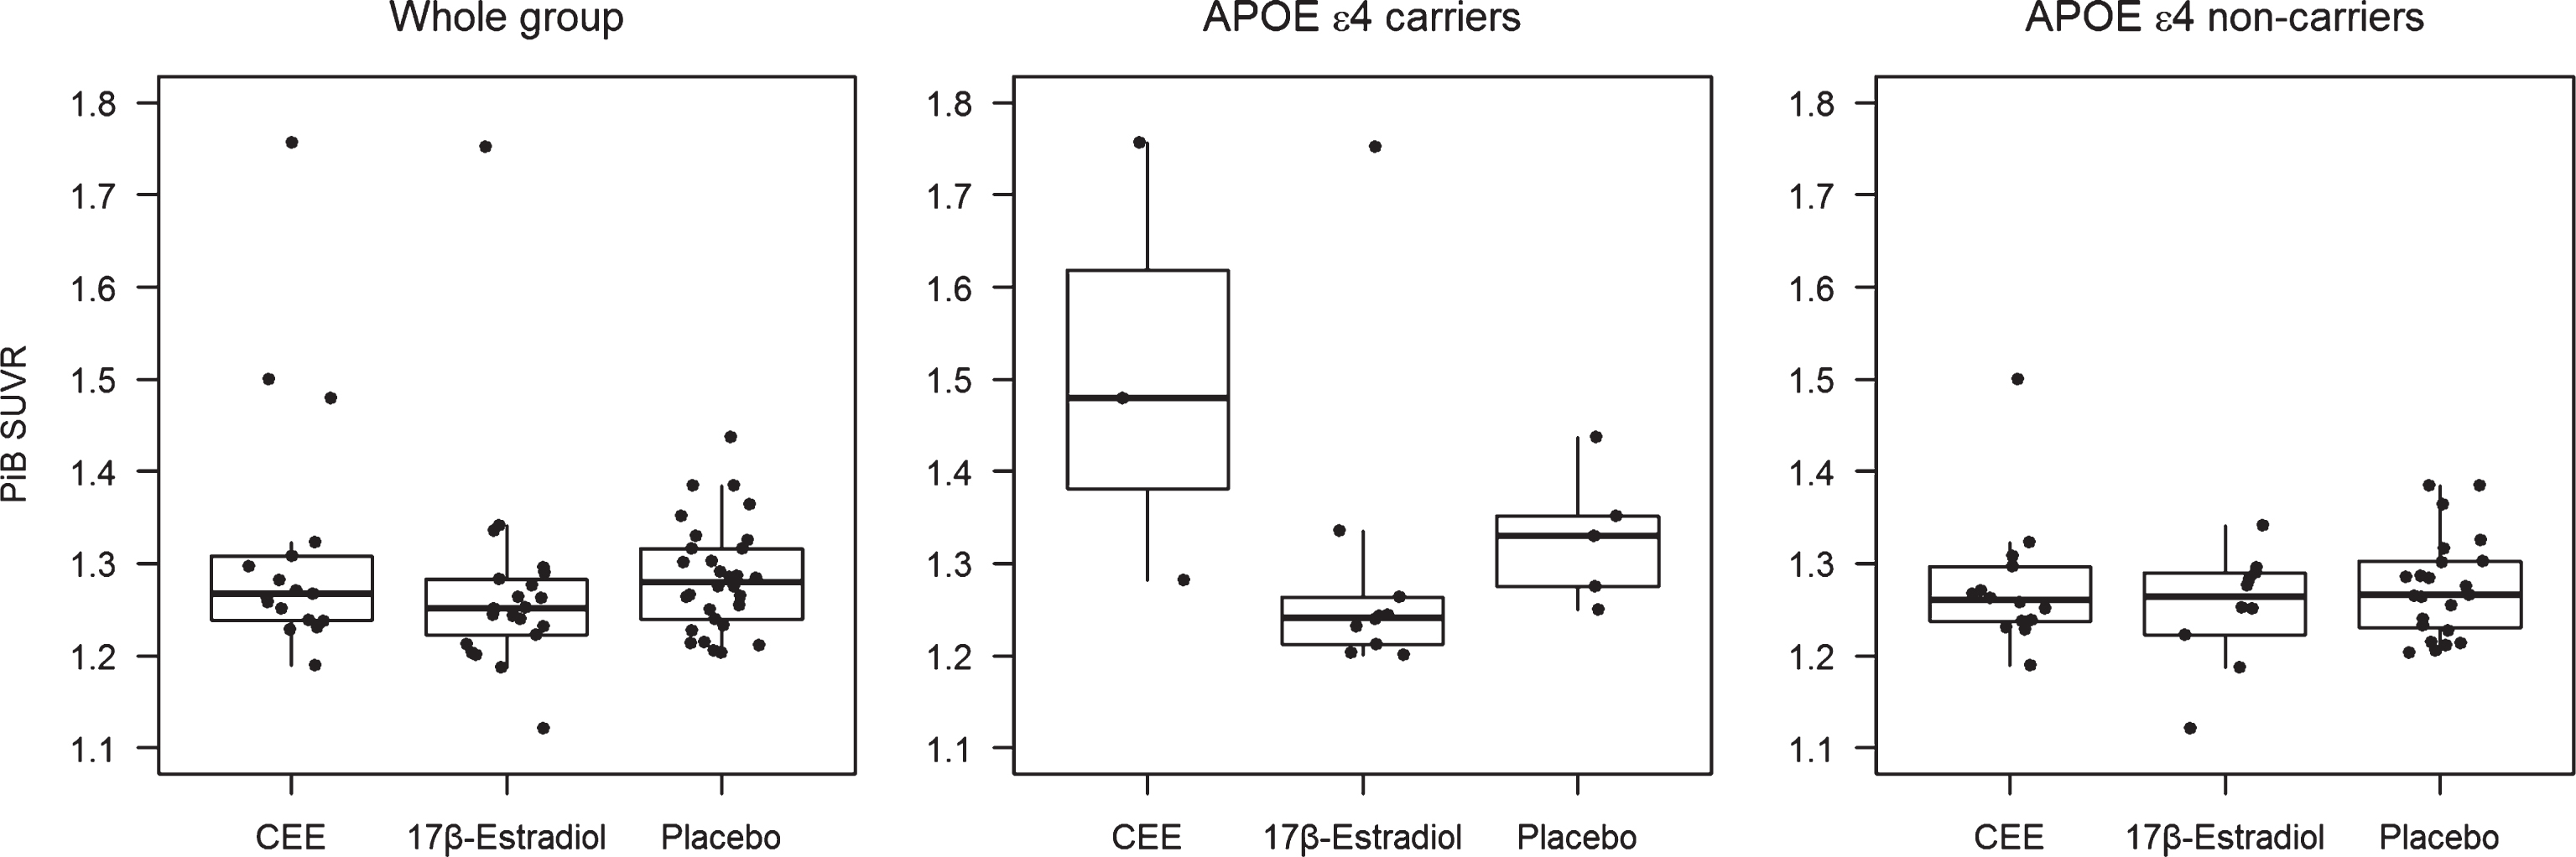 PiB SUVR in the oral CEE, transdermal 17β-estradiol, and the placebo groups in the whole group of participants, in APOE ɛ4 carriers, and in APOE ɛ4 non-carriers.